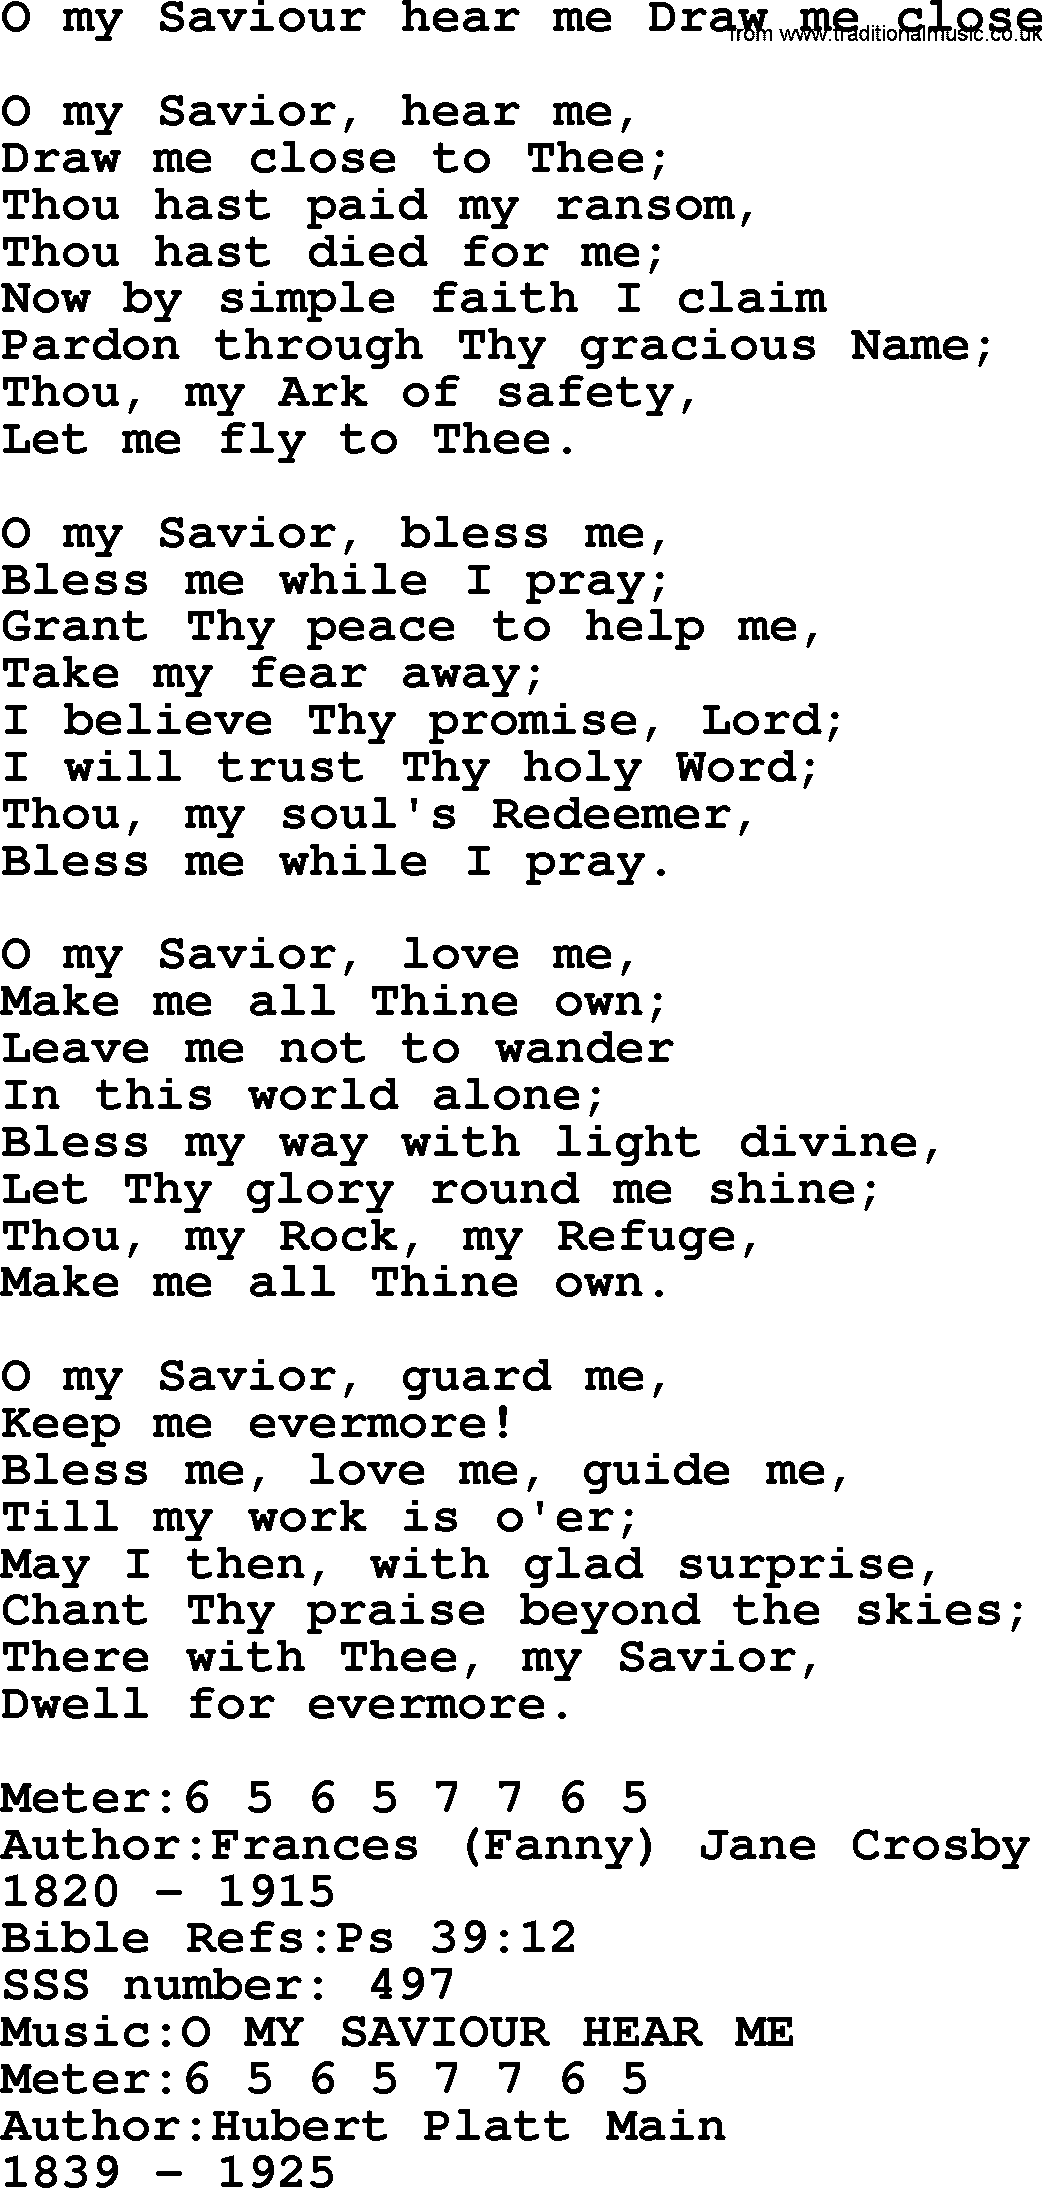 Sacred Songs and Solos complete, 1200 Hymns, title: O My Saviour Hear Me Draw Me Close, lyrics and PDF